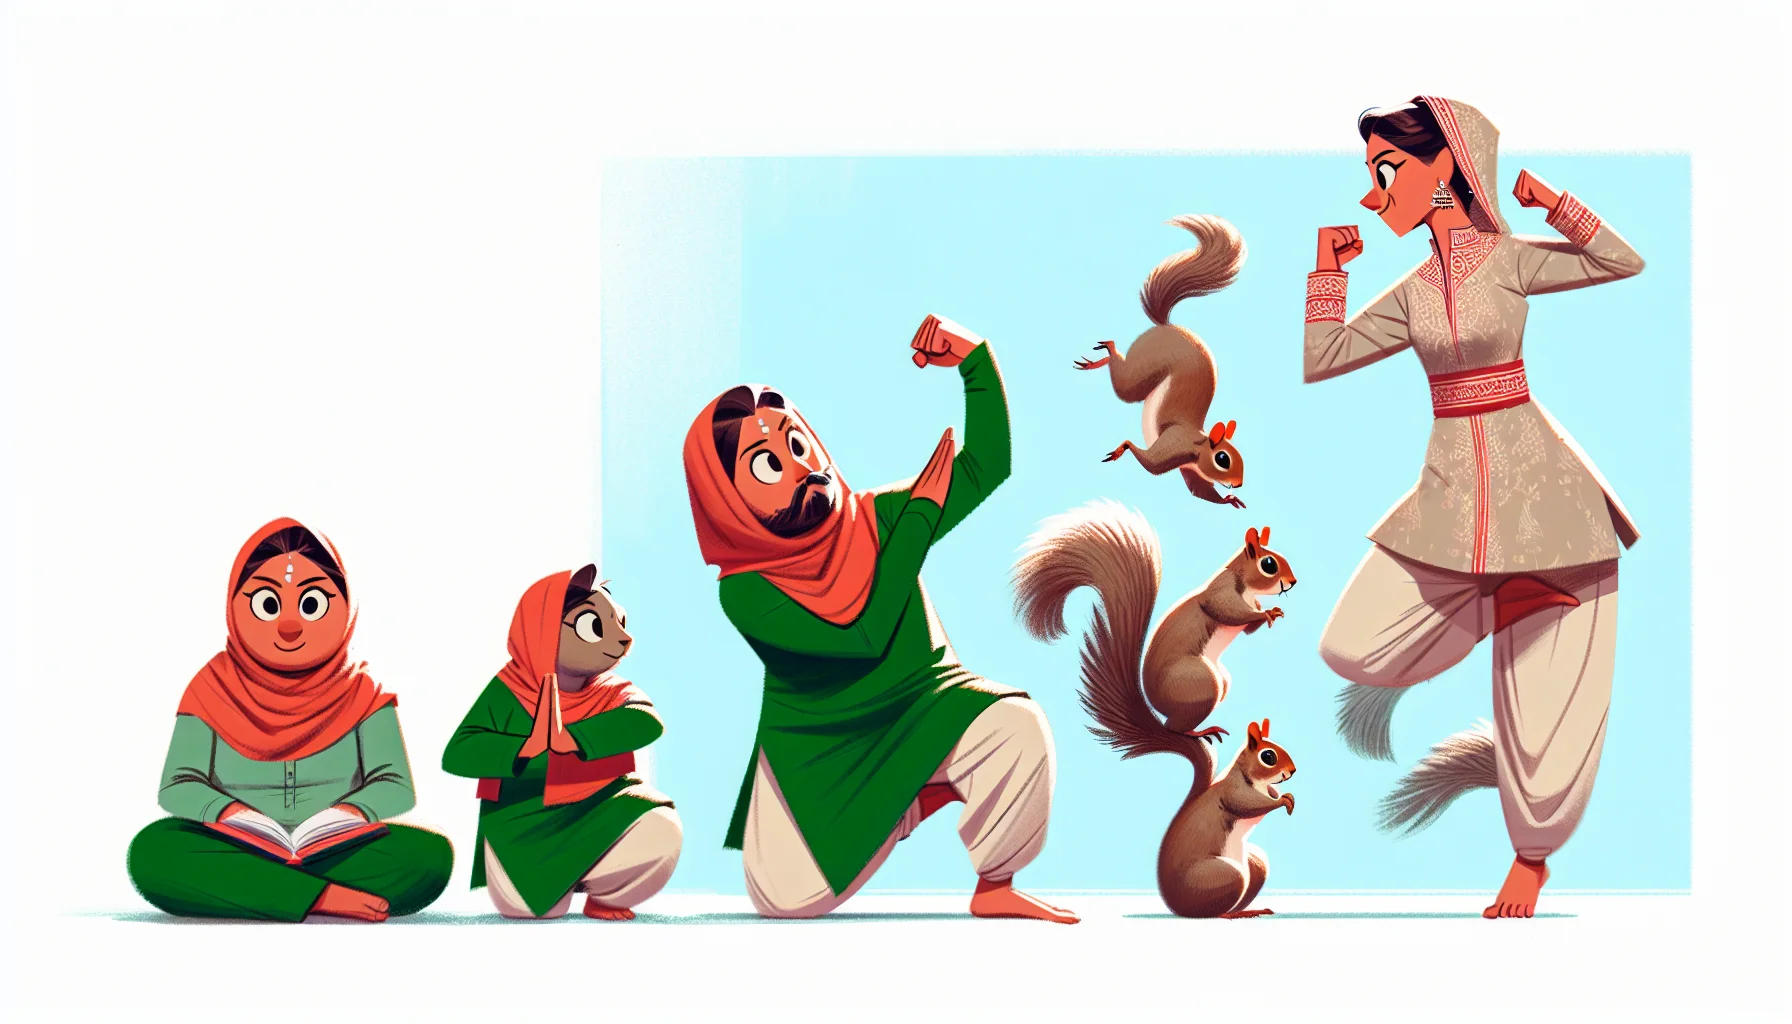 Create a lively and humorous image showing the transformation of a South Asian woman practicing calisthenics. This progression should start from her initial struggles as a beginner and end with her masterful control as an expert. Add in a unique and funny twist—like having a curious group of squirrels mimicking her exercises—to inspire others to engage in physical fitness.